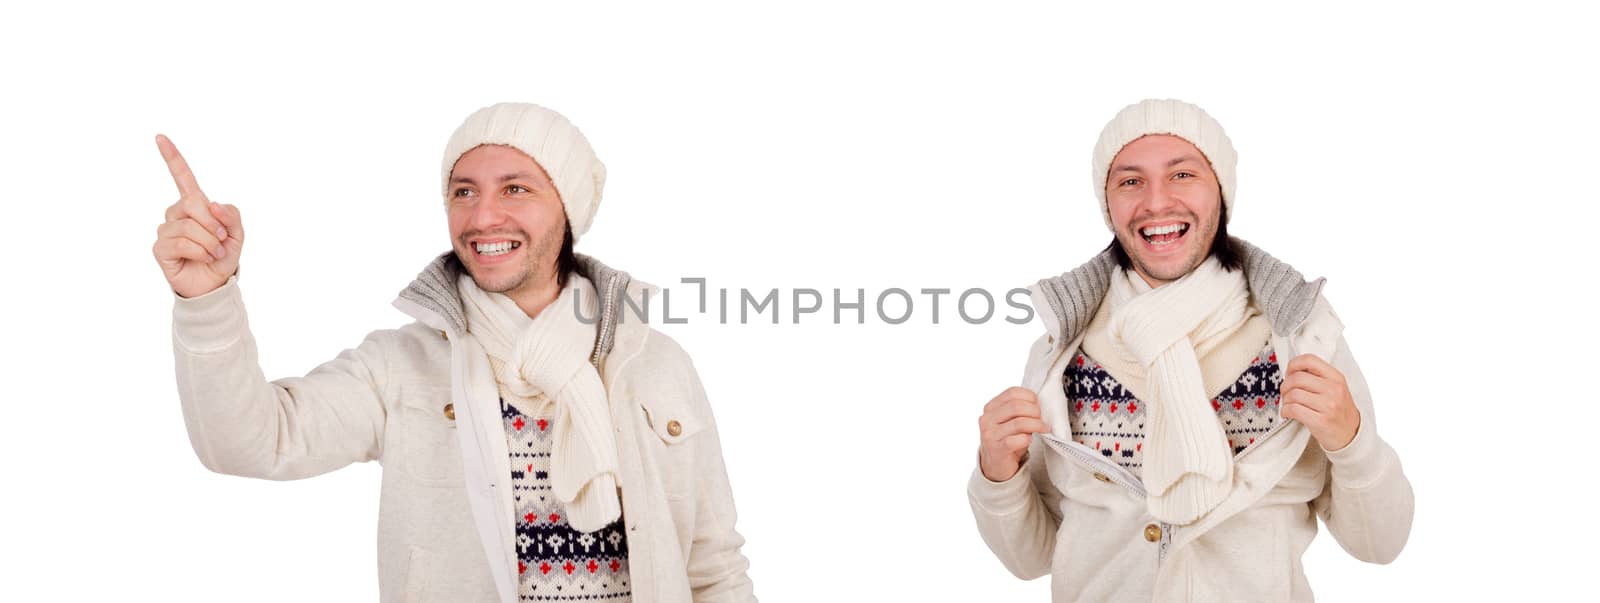 Young man in winter clothes isolated on white